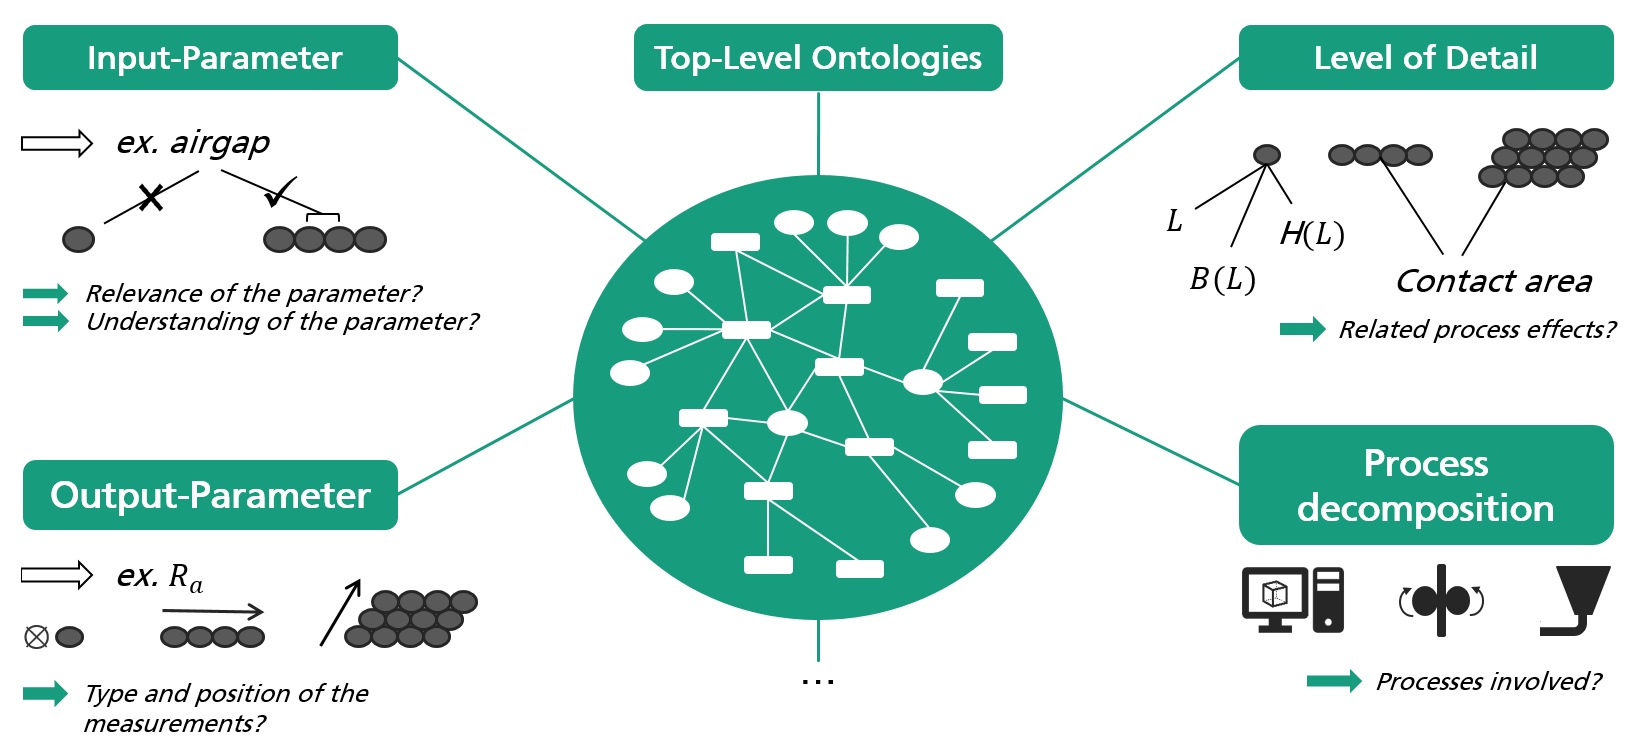 Creation of an ontology structure